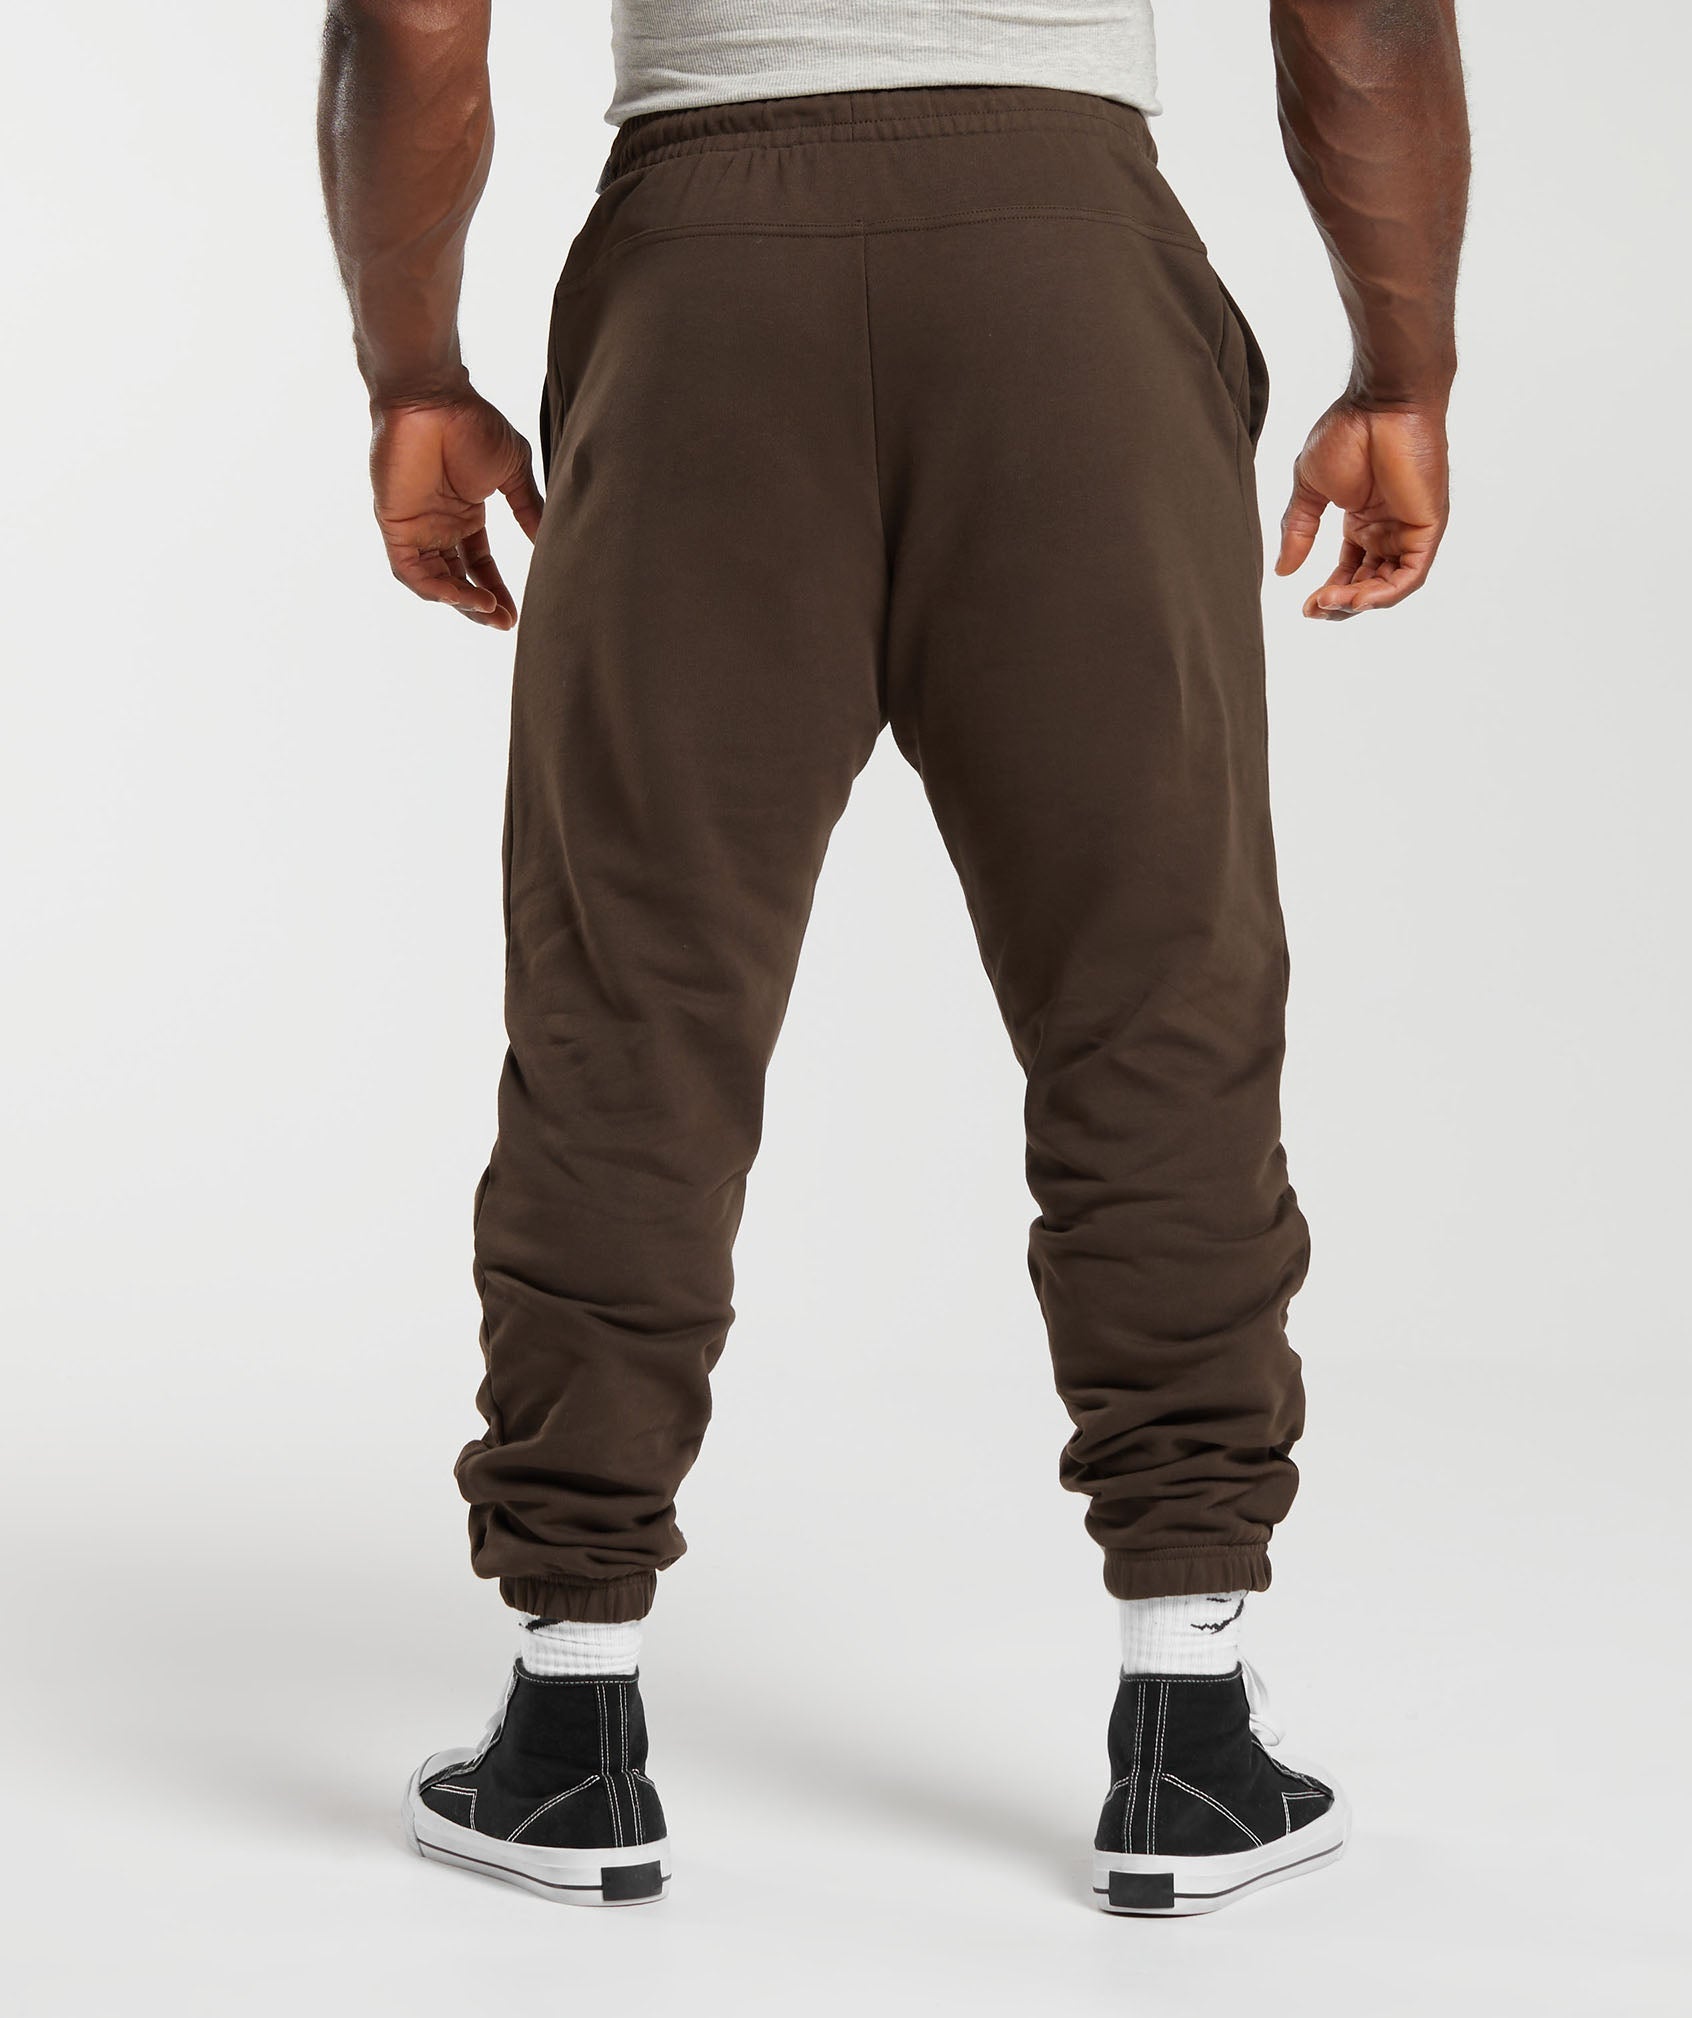 Global Lifting Oversized Pants in Brown - view 2